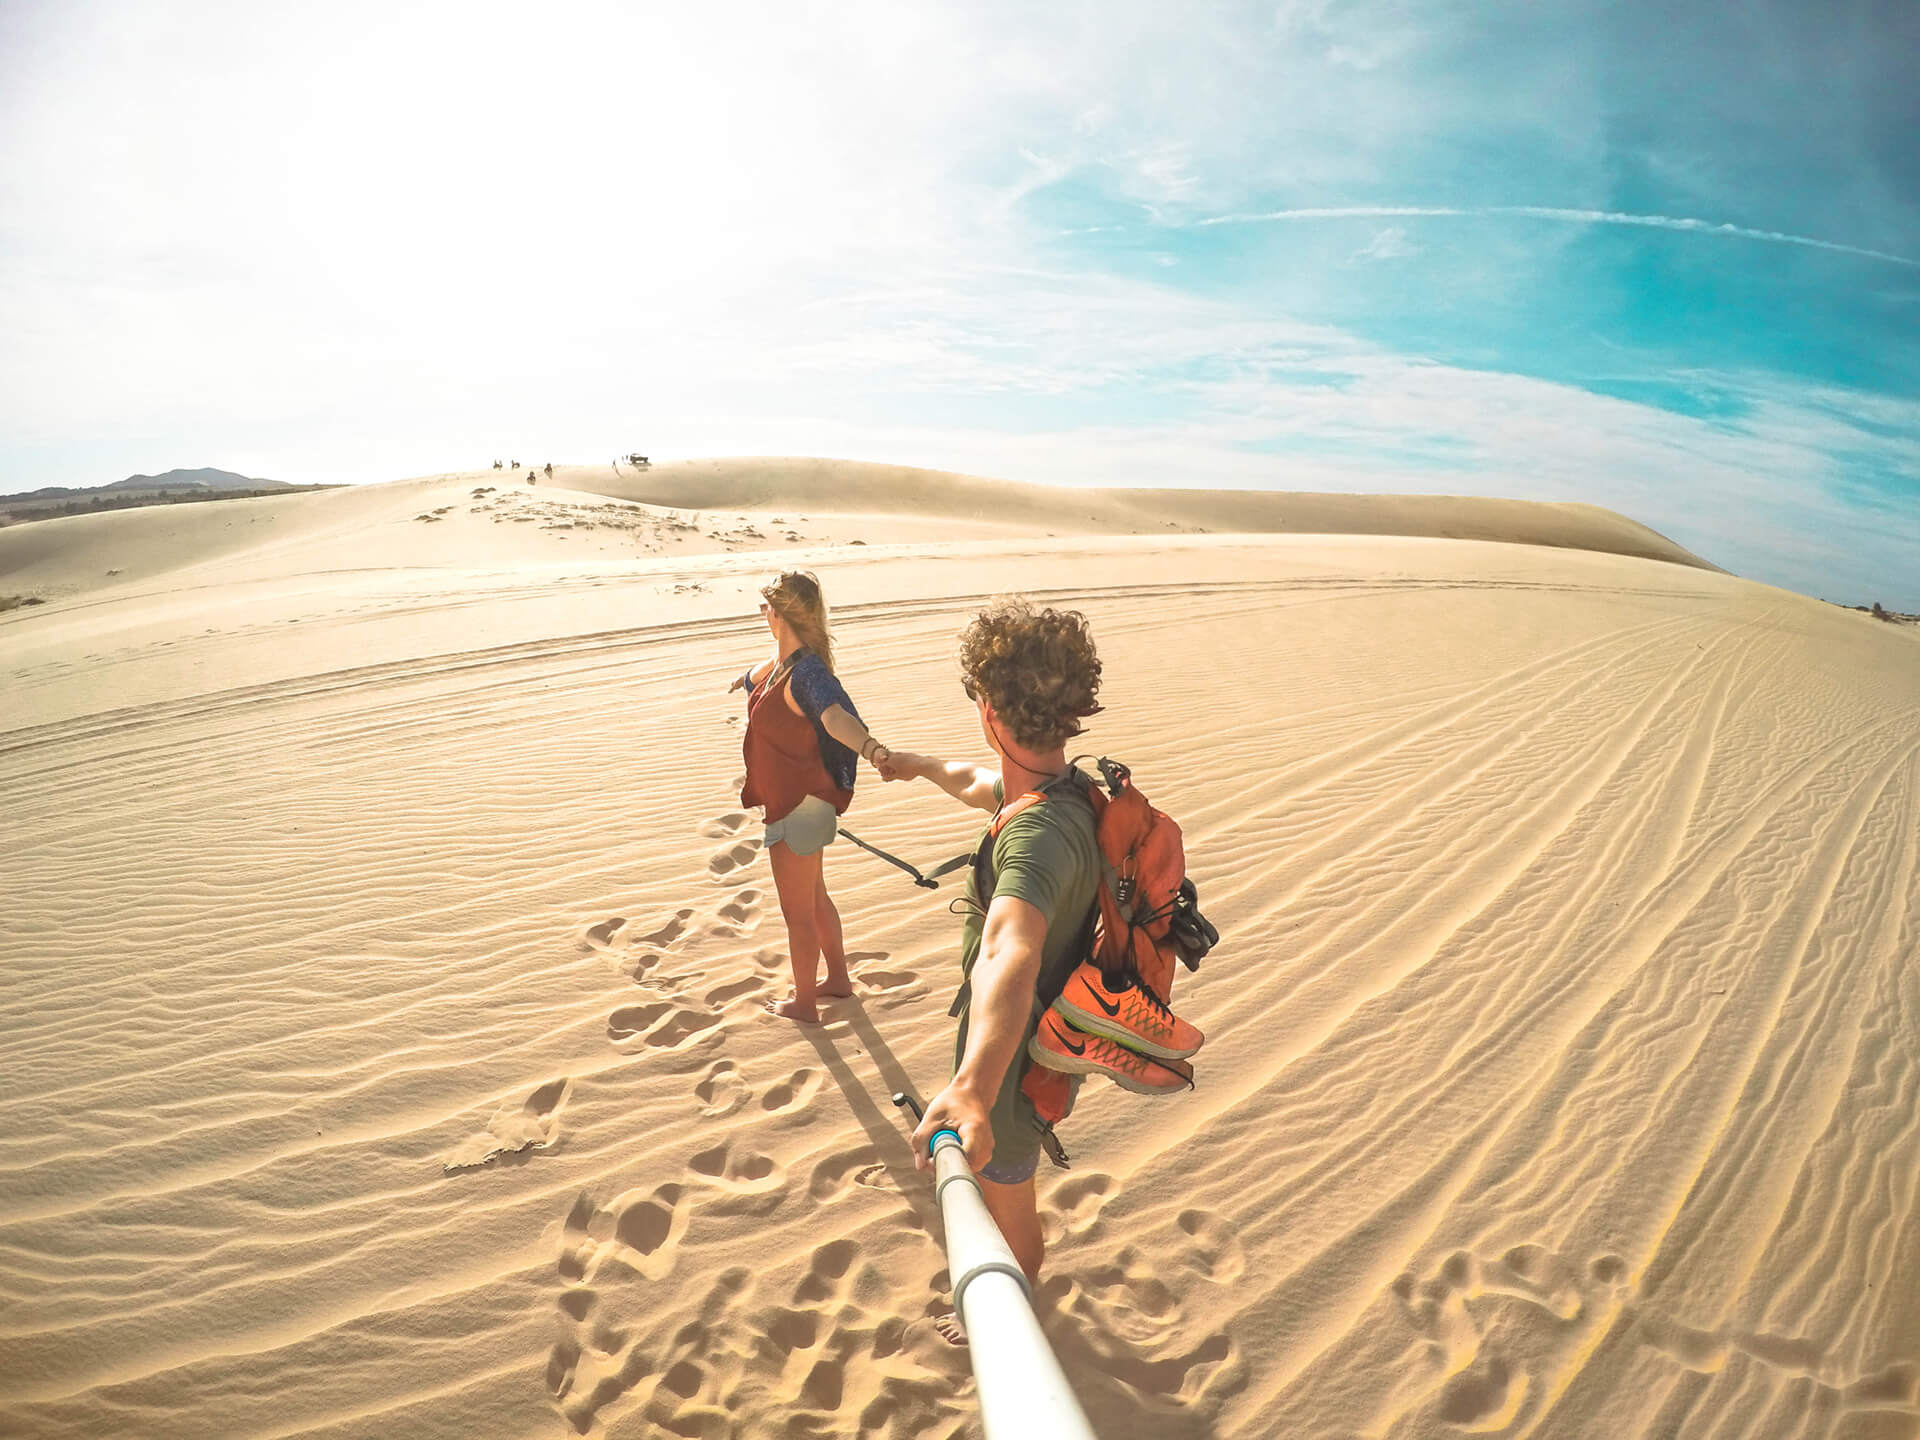 ​Mui Ne Sand Dunes - The great place to experience